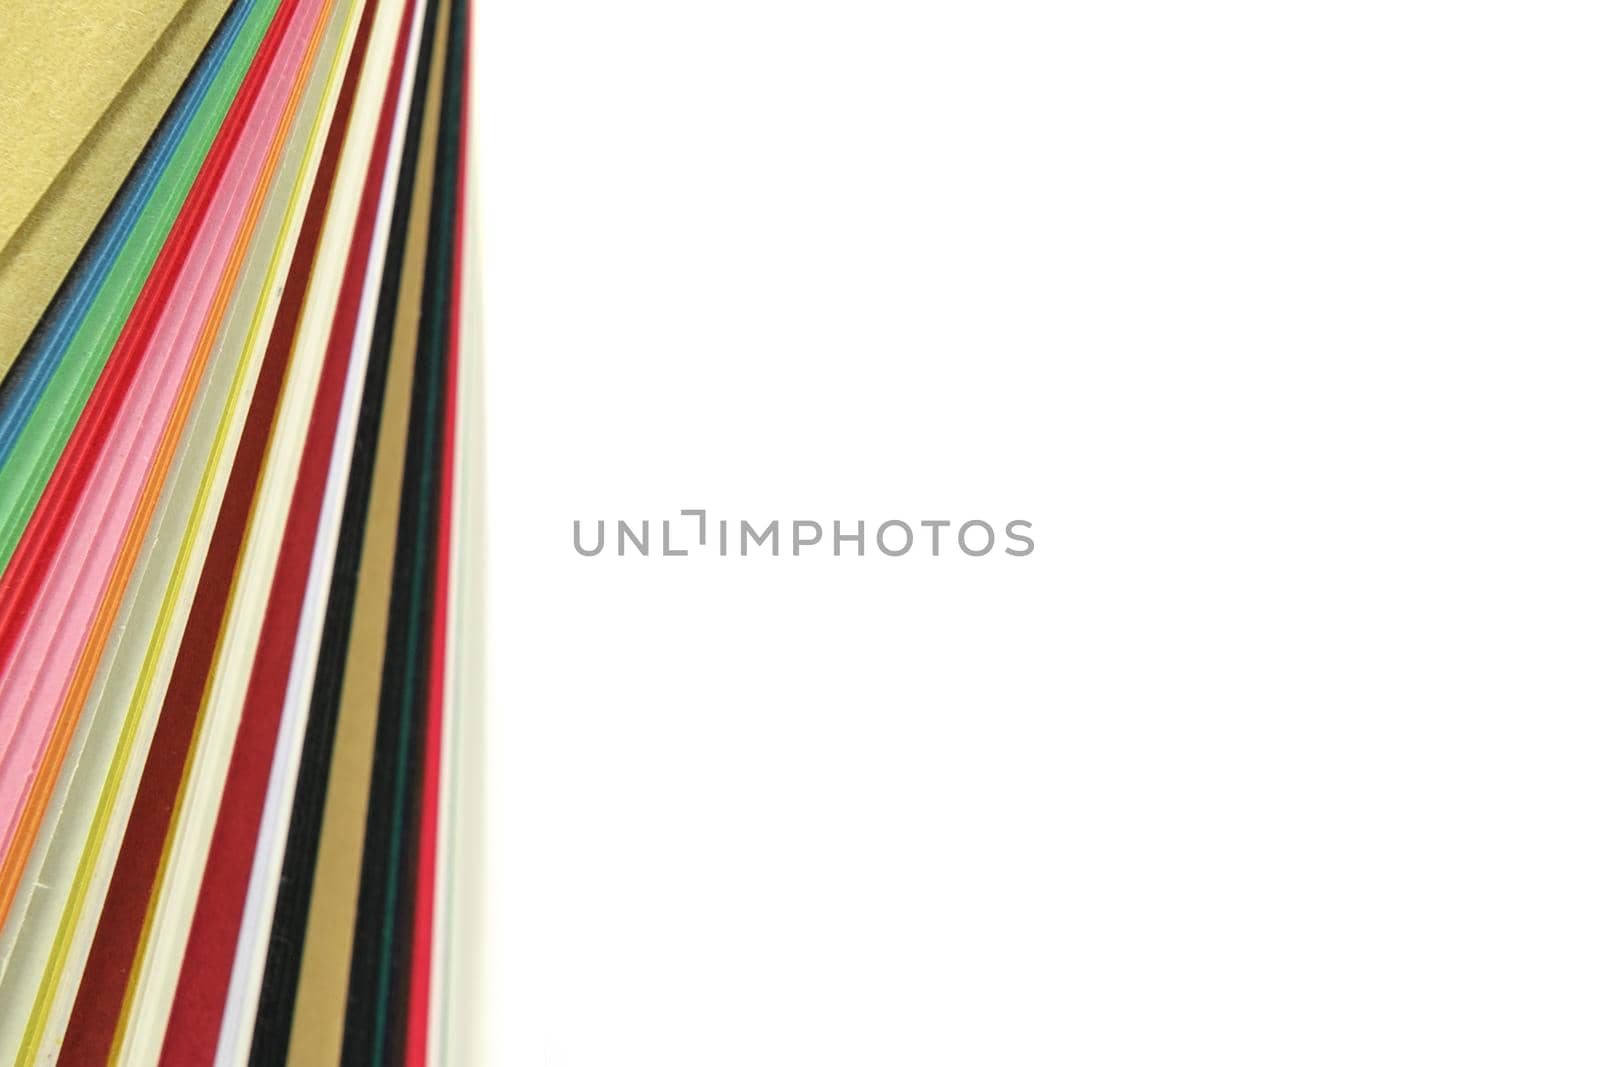 Sheets of colored paper on white background by Roberto